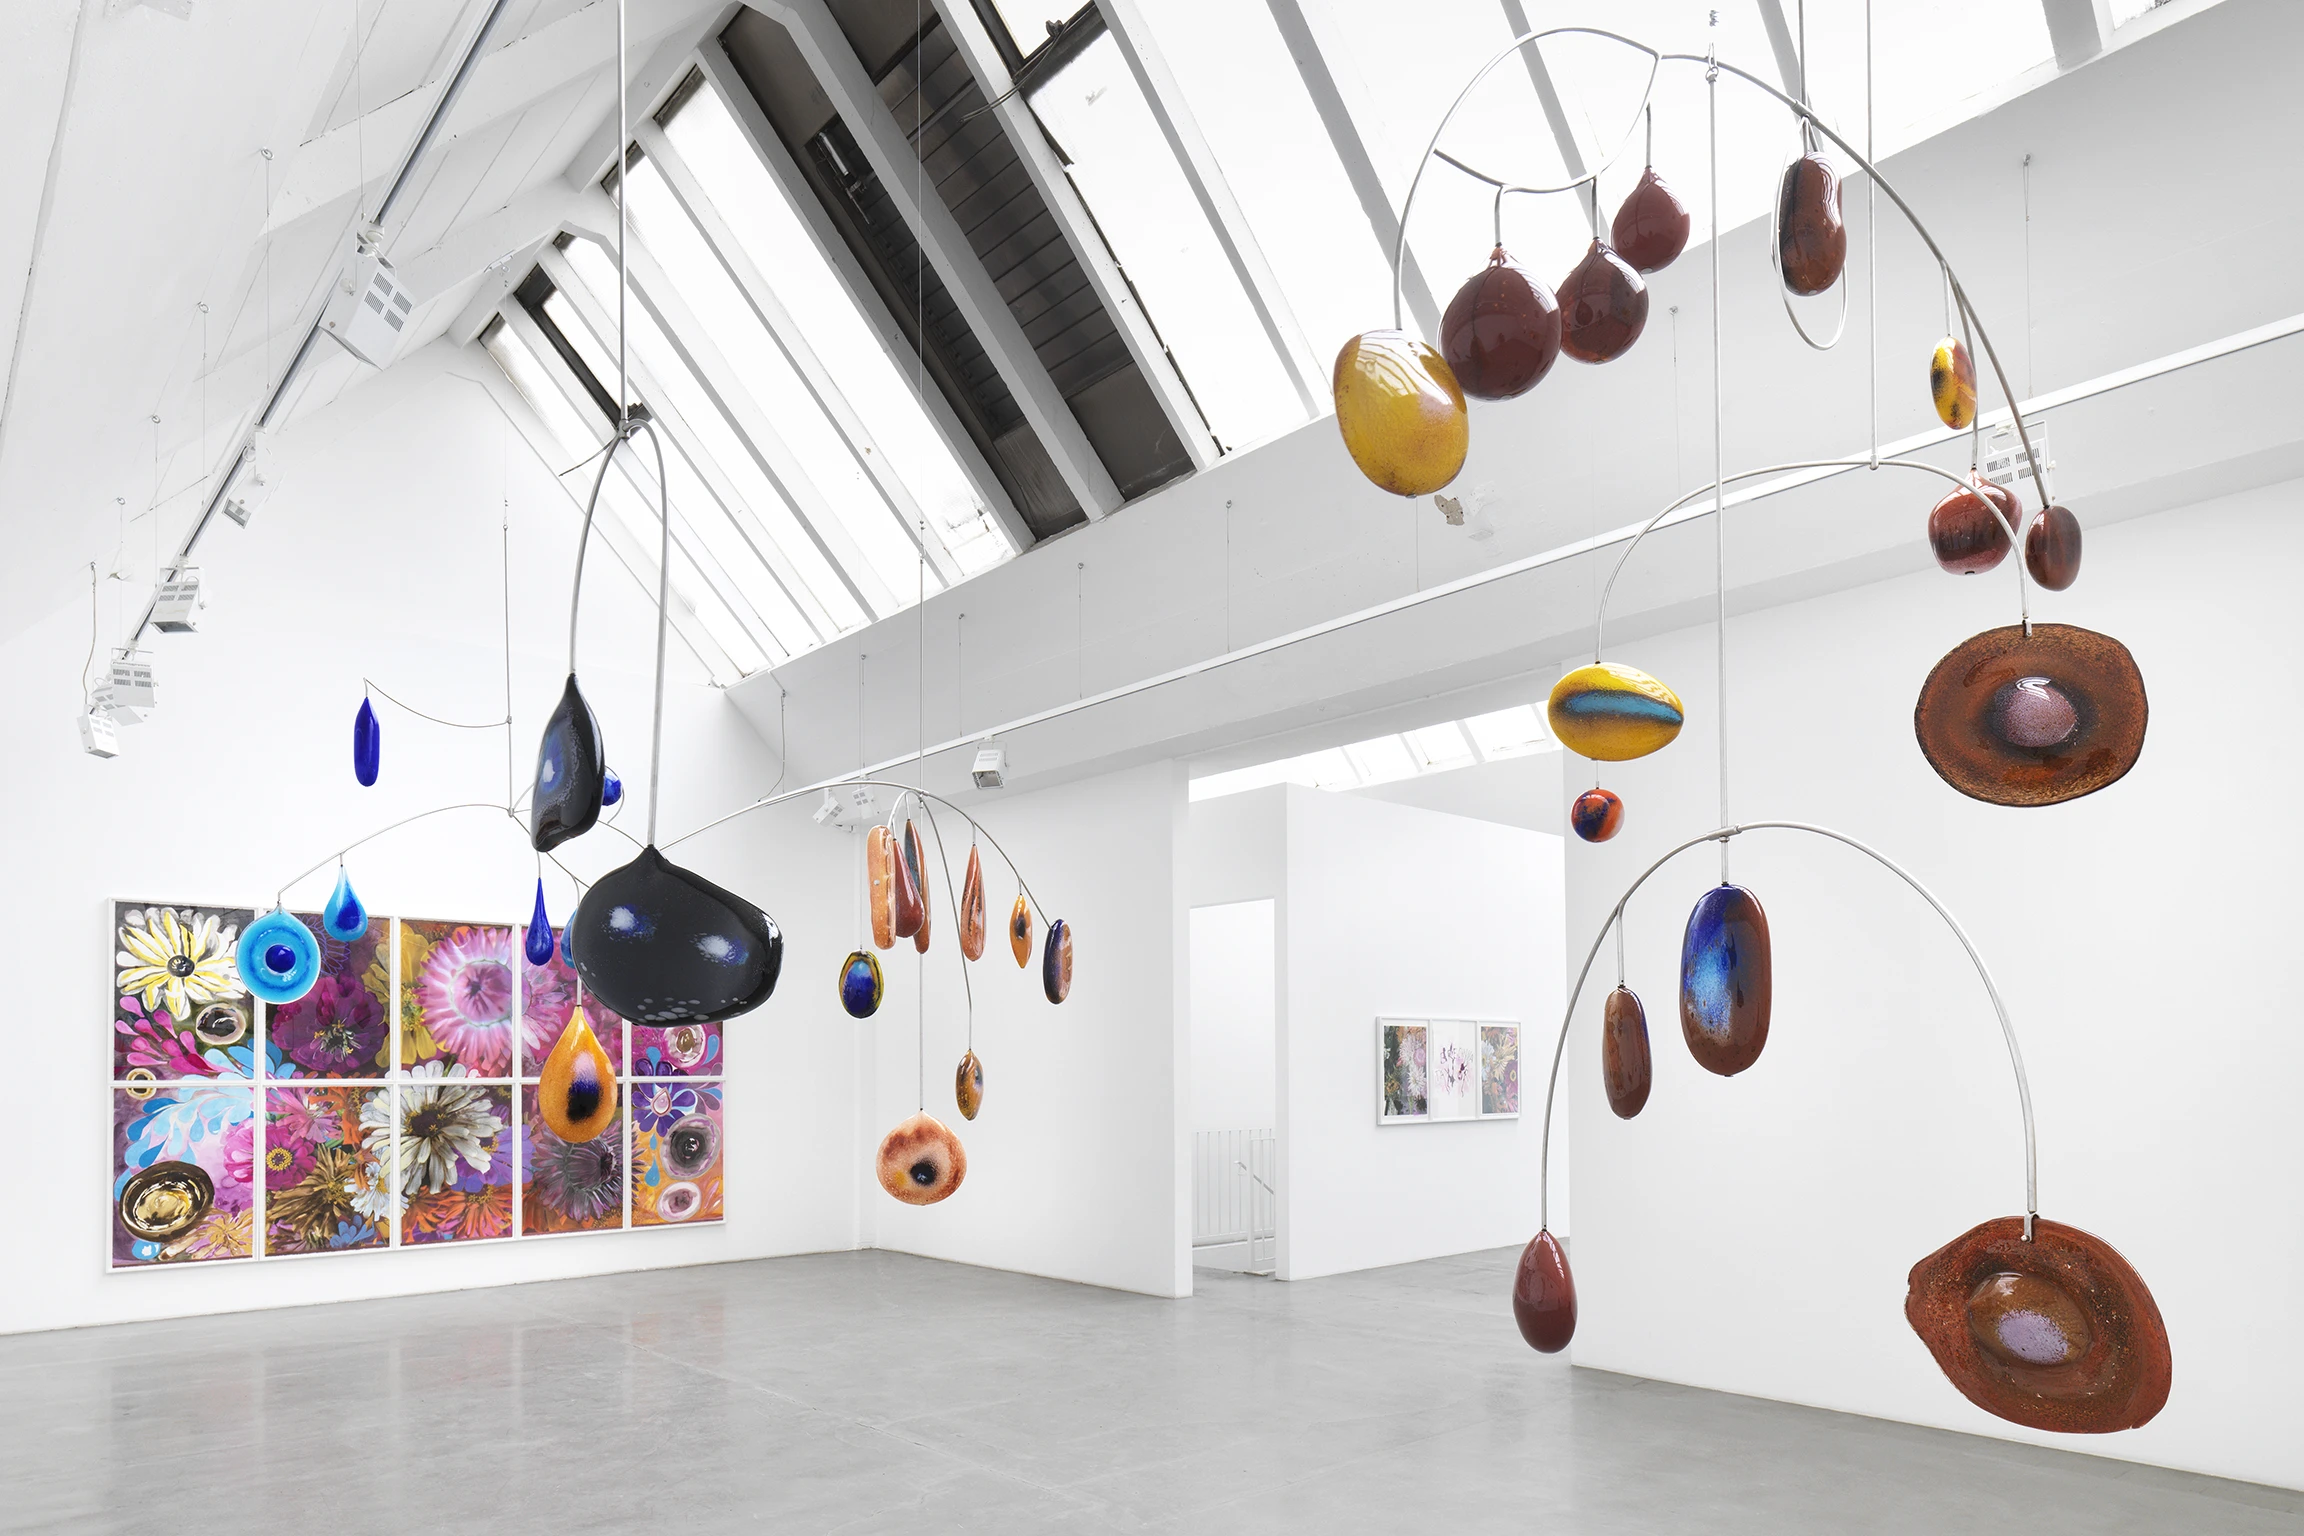 In a white-walled gallery space a colorful mobile hangs from the ceiling